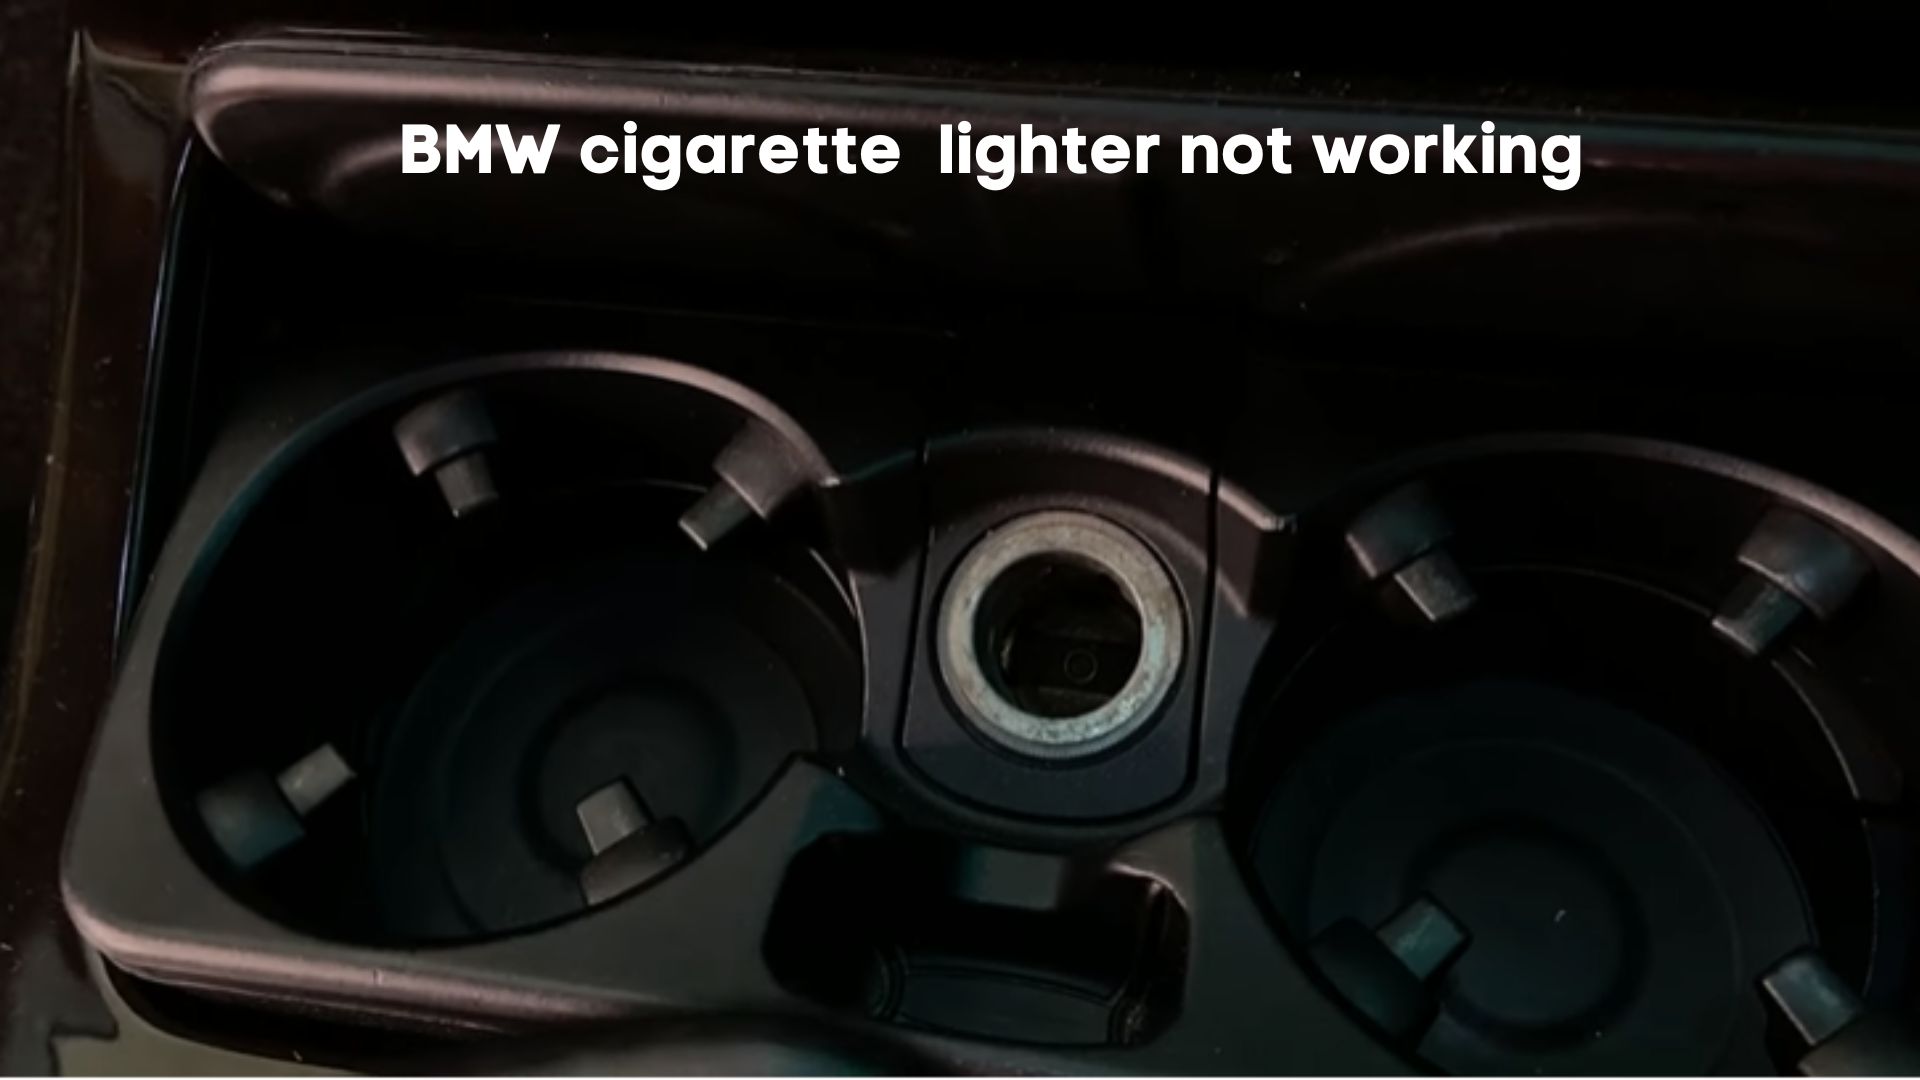 bmw x1, x5, x7, e90, f30, 1 and 5 series cigarette lighter not working